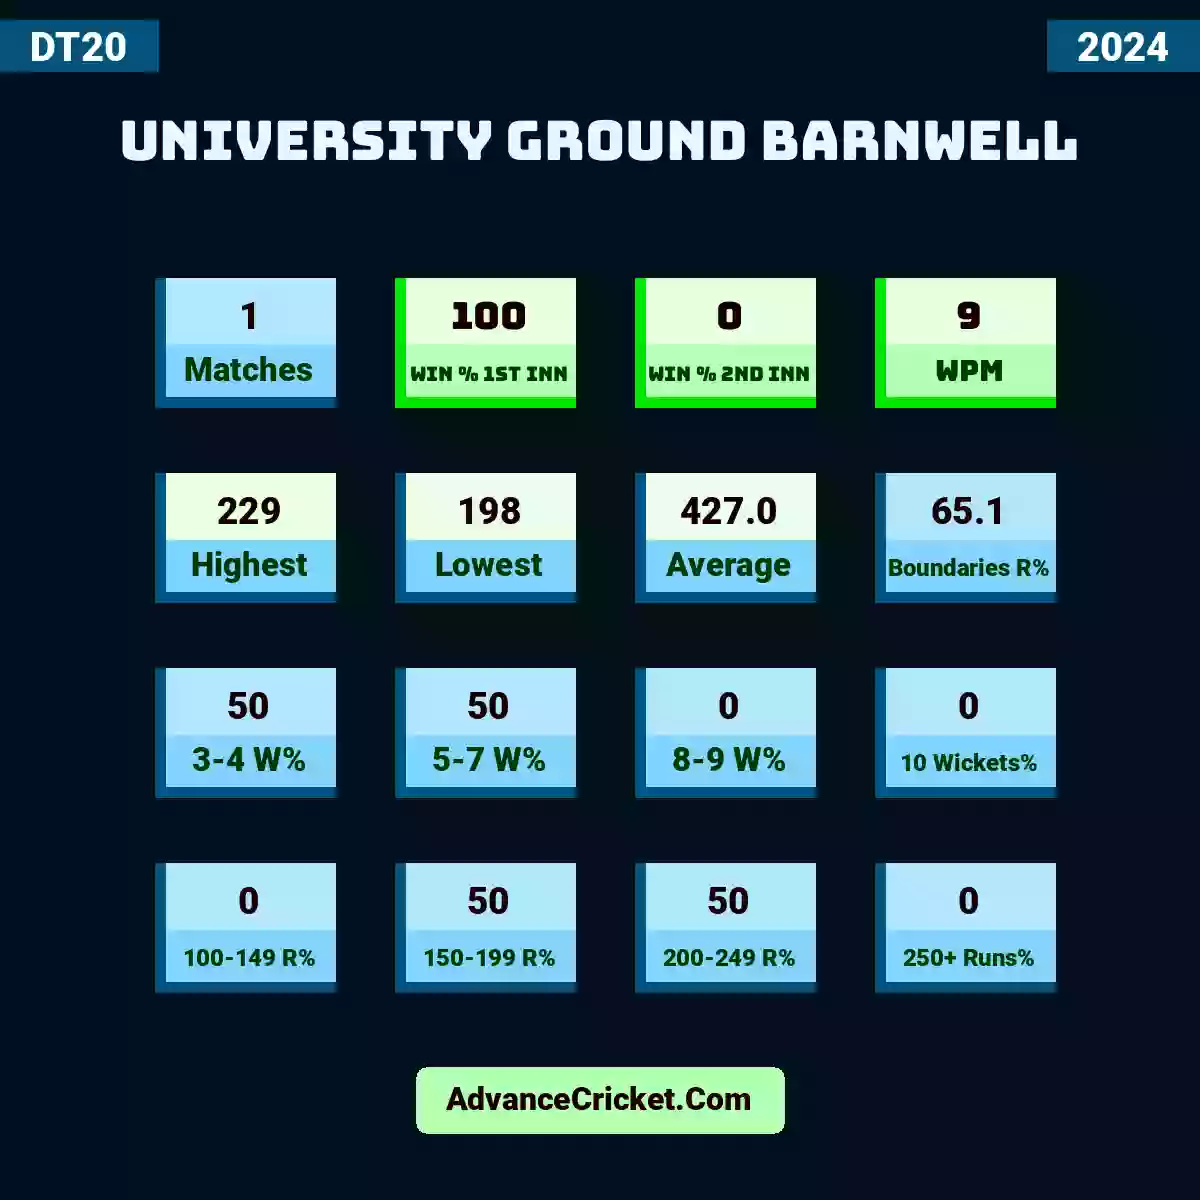 Image showing University Ground Barnwell with Matches: 1, Win % 1st Inn: 100, Win % 2nd Inn: 0, WPM: 9, Highest: 229, Lowest: 198, Average: 427.0, Boundaries R%: 65.1, 3-4 W%: 50, 5-7 W%: 50, 8-9 W%: 0, 10 Wickets%: 0, 100-149 R%: 0, 150-199 R%: 50, 200-249 R%: 50, 250+ Runs%: 0.